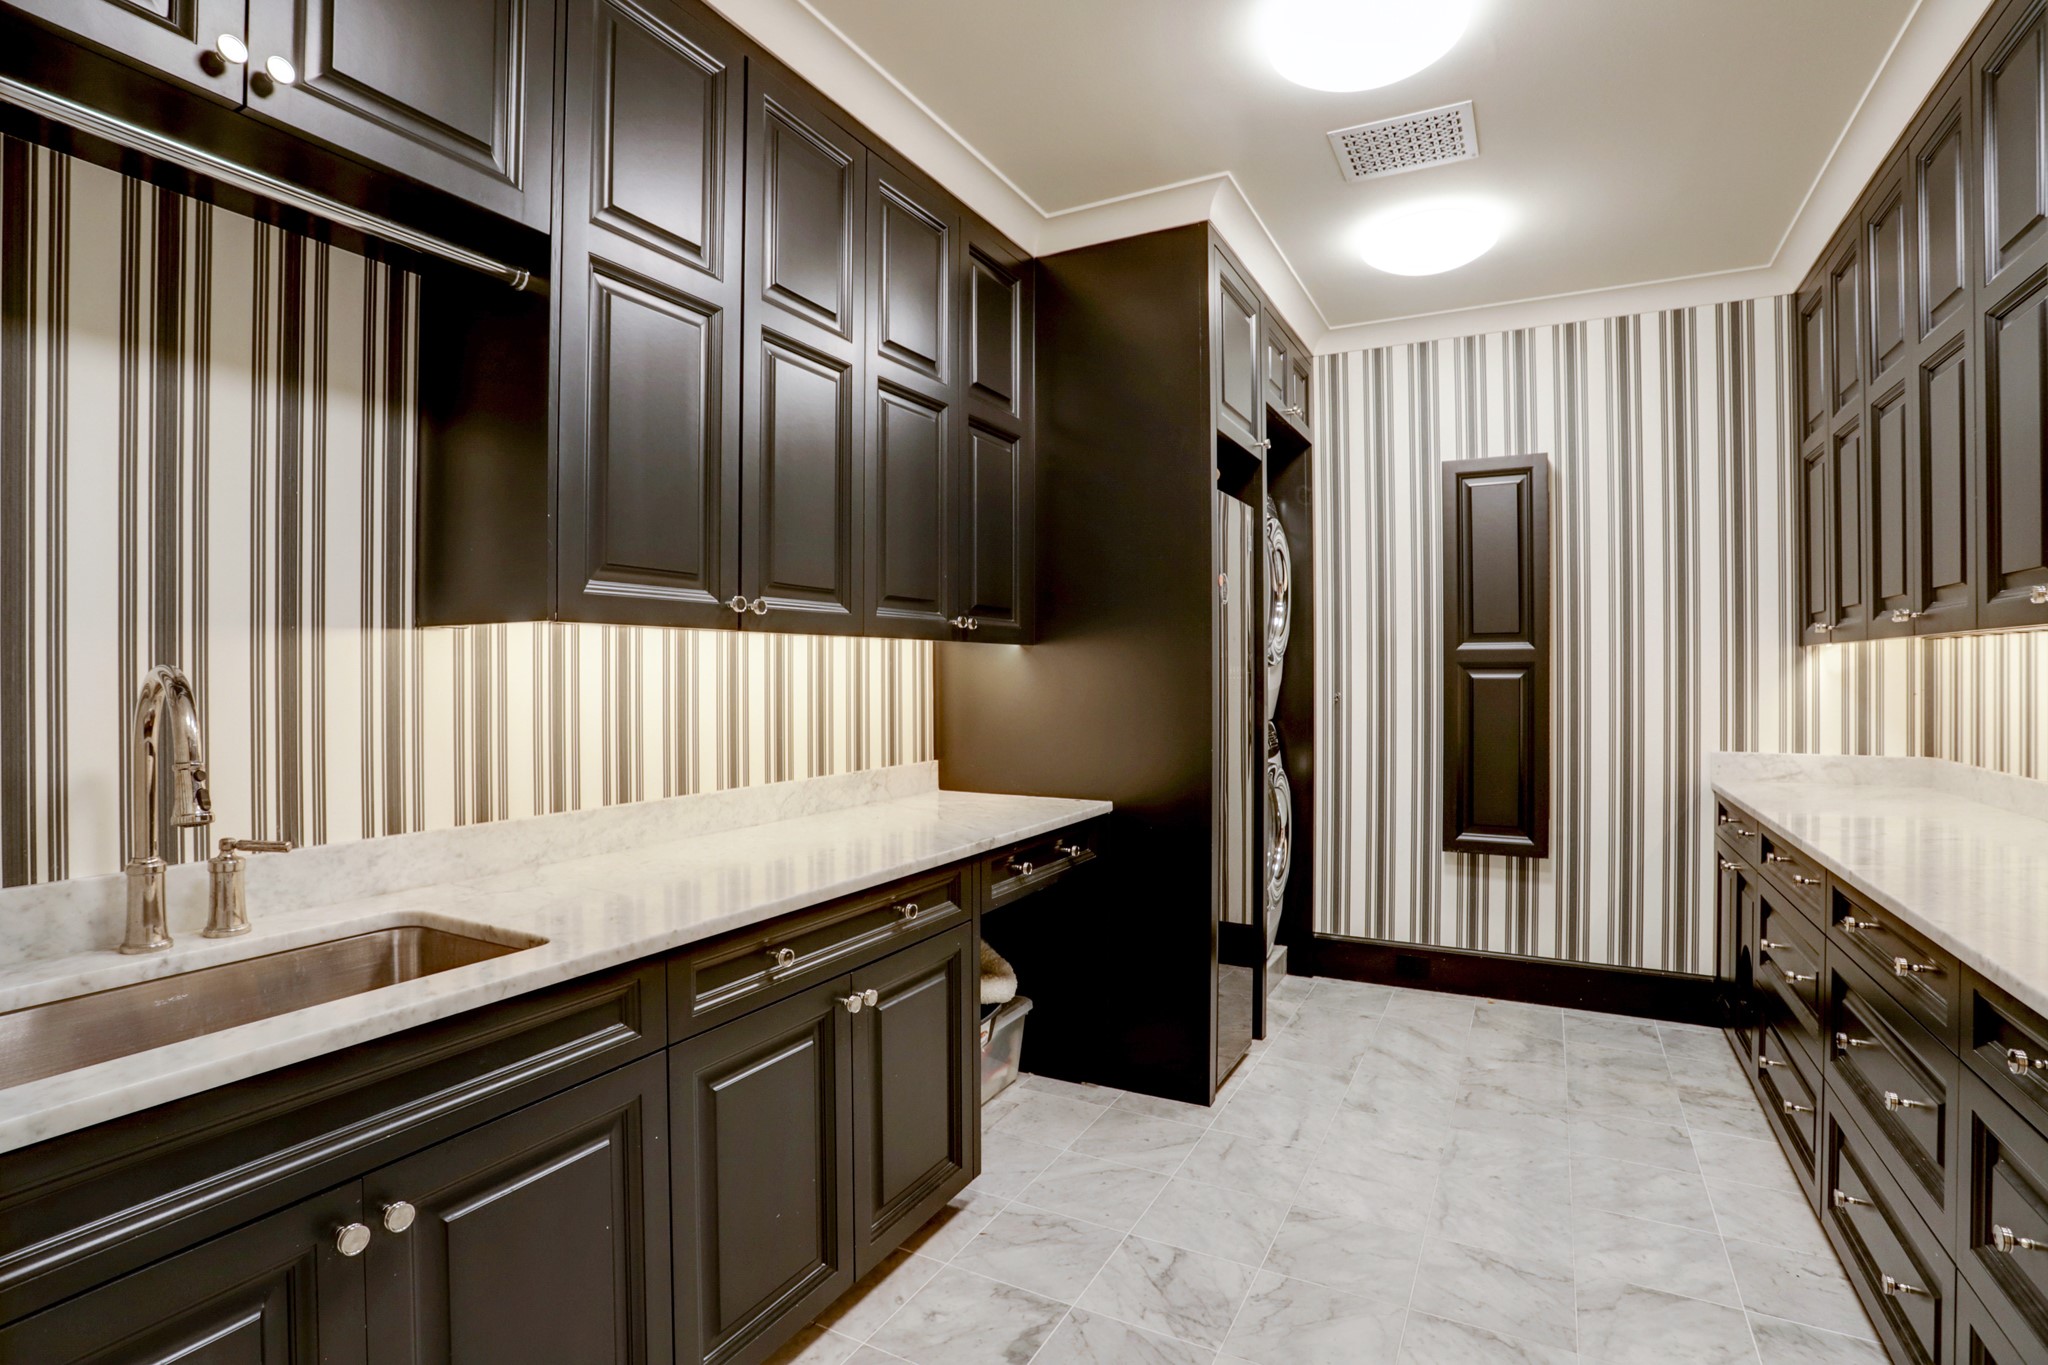 Utility Room: LG clothing steamer appliance. Carrara marble countertop & flooring. Built-ins with soft close cabinets & drawers with under cabinet lighting. Sink with nickel hardware and silver nickel hardware. Stackable washer & dryer. Refrigerator. Built-in fold out ironing board.